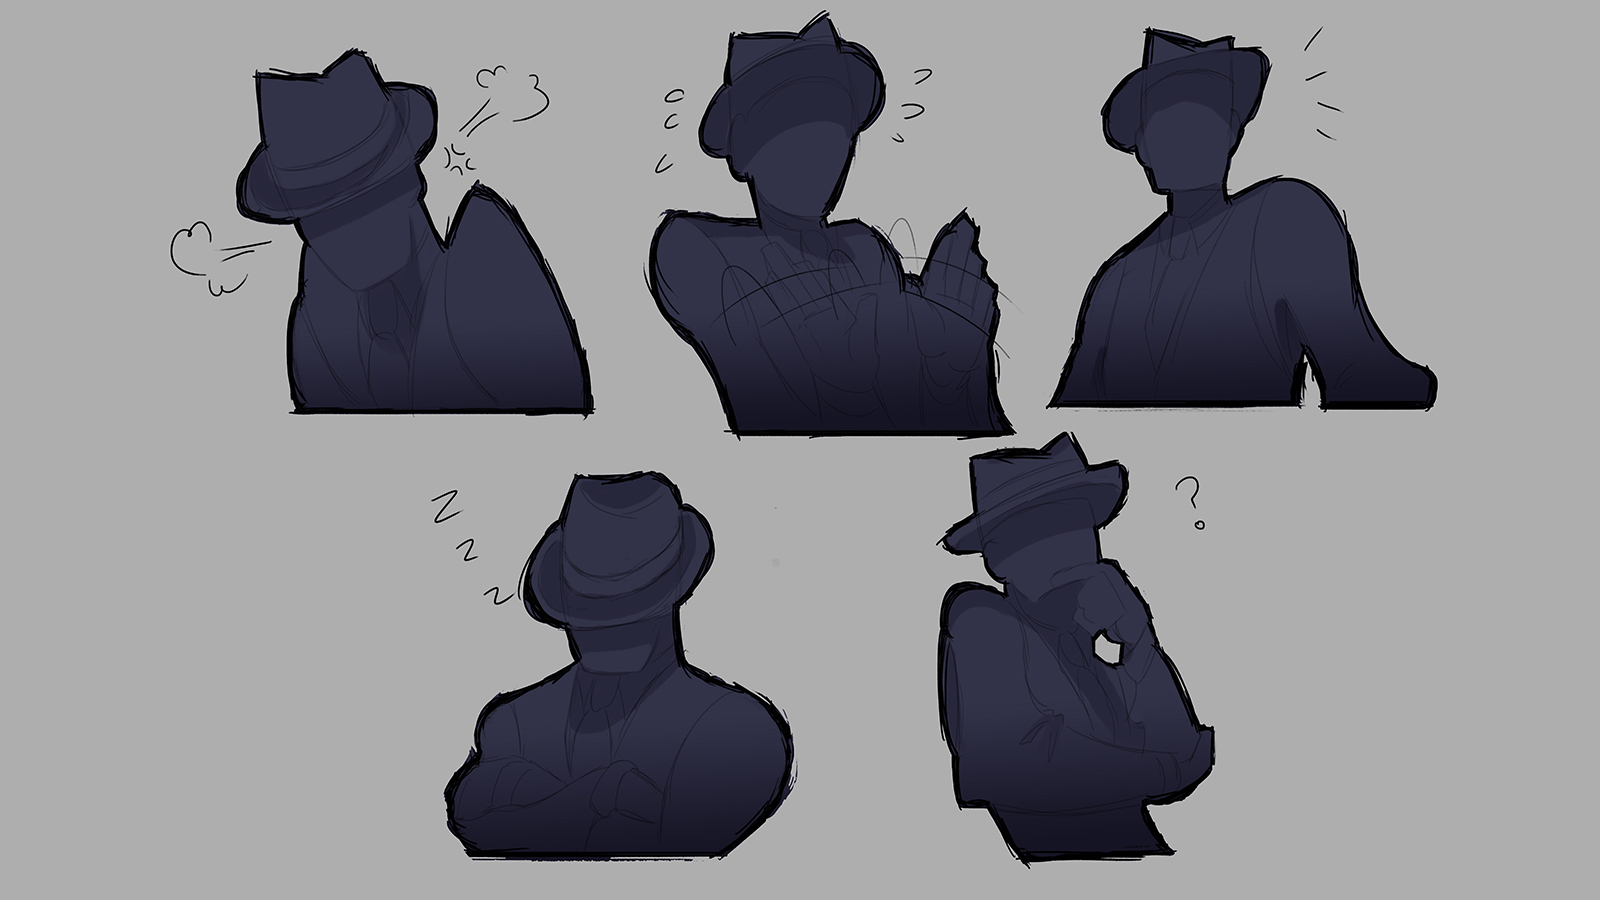 Several different facial expressions for a goon character.